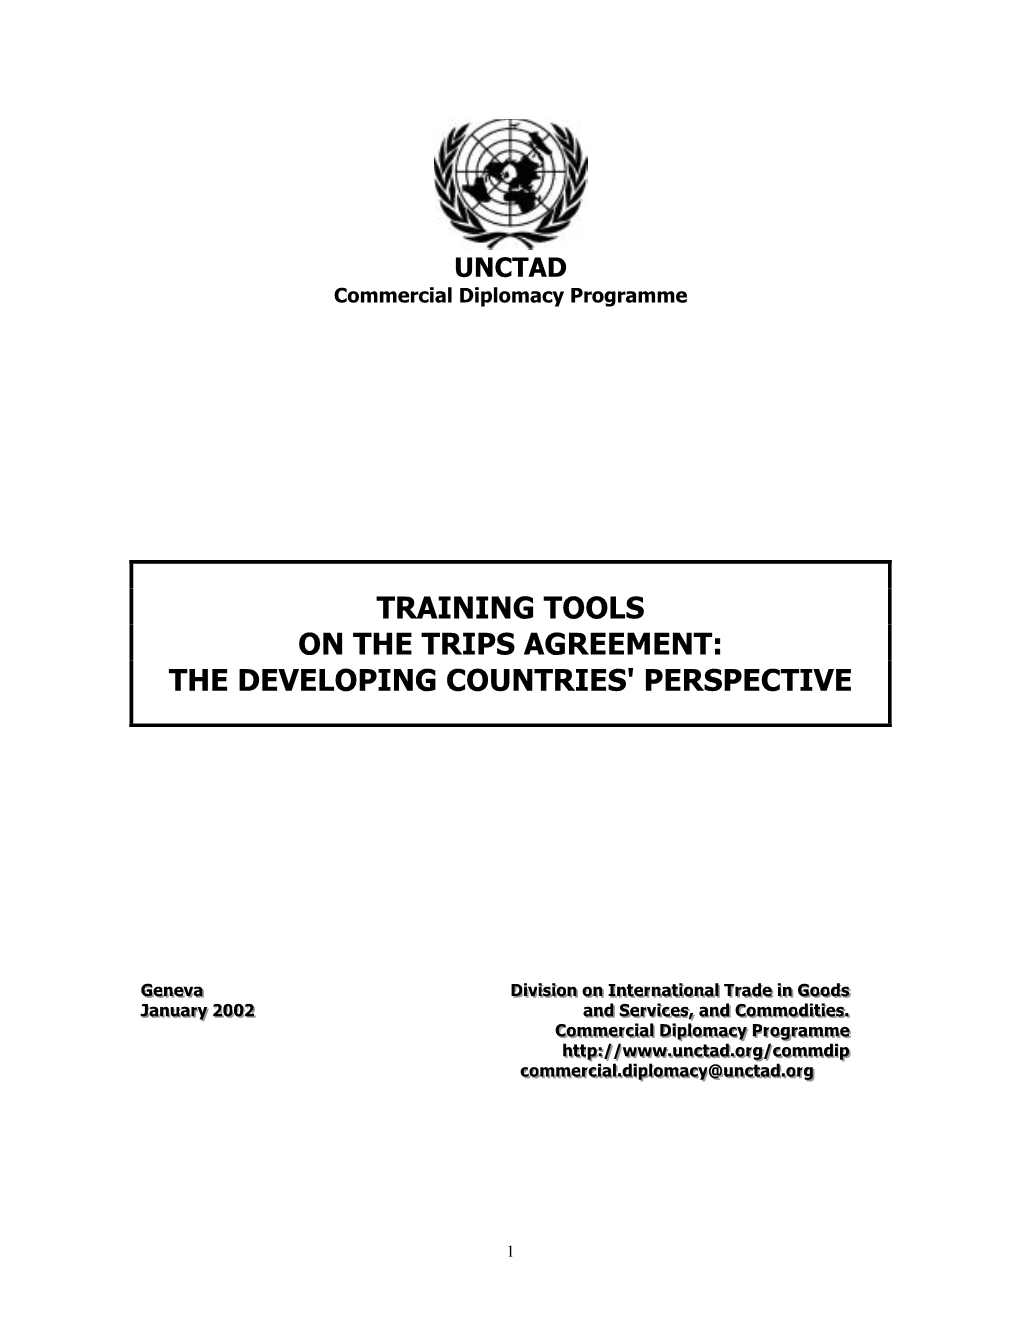 Training Tools on the Trips Agreement: the Developing Countries' Perspective